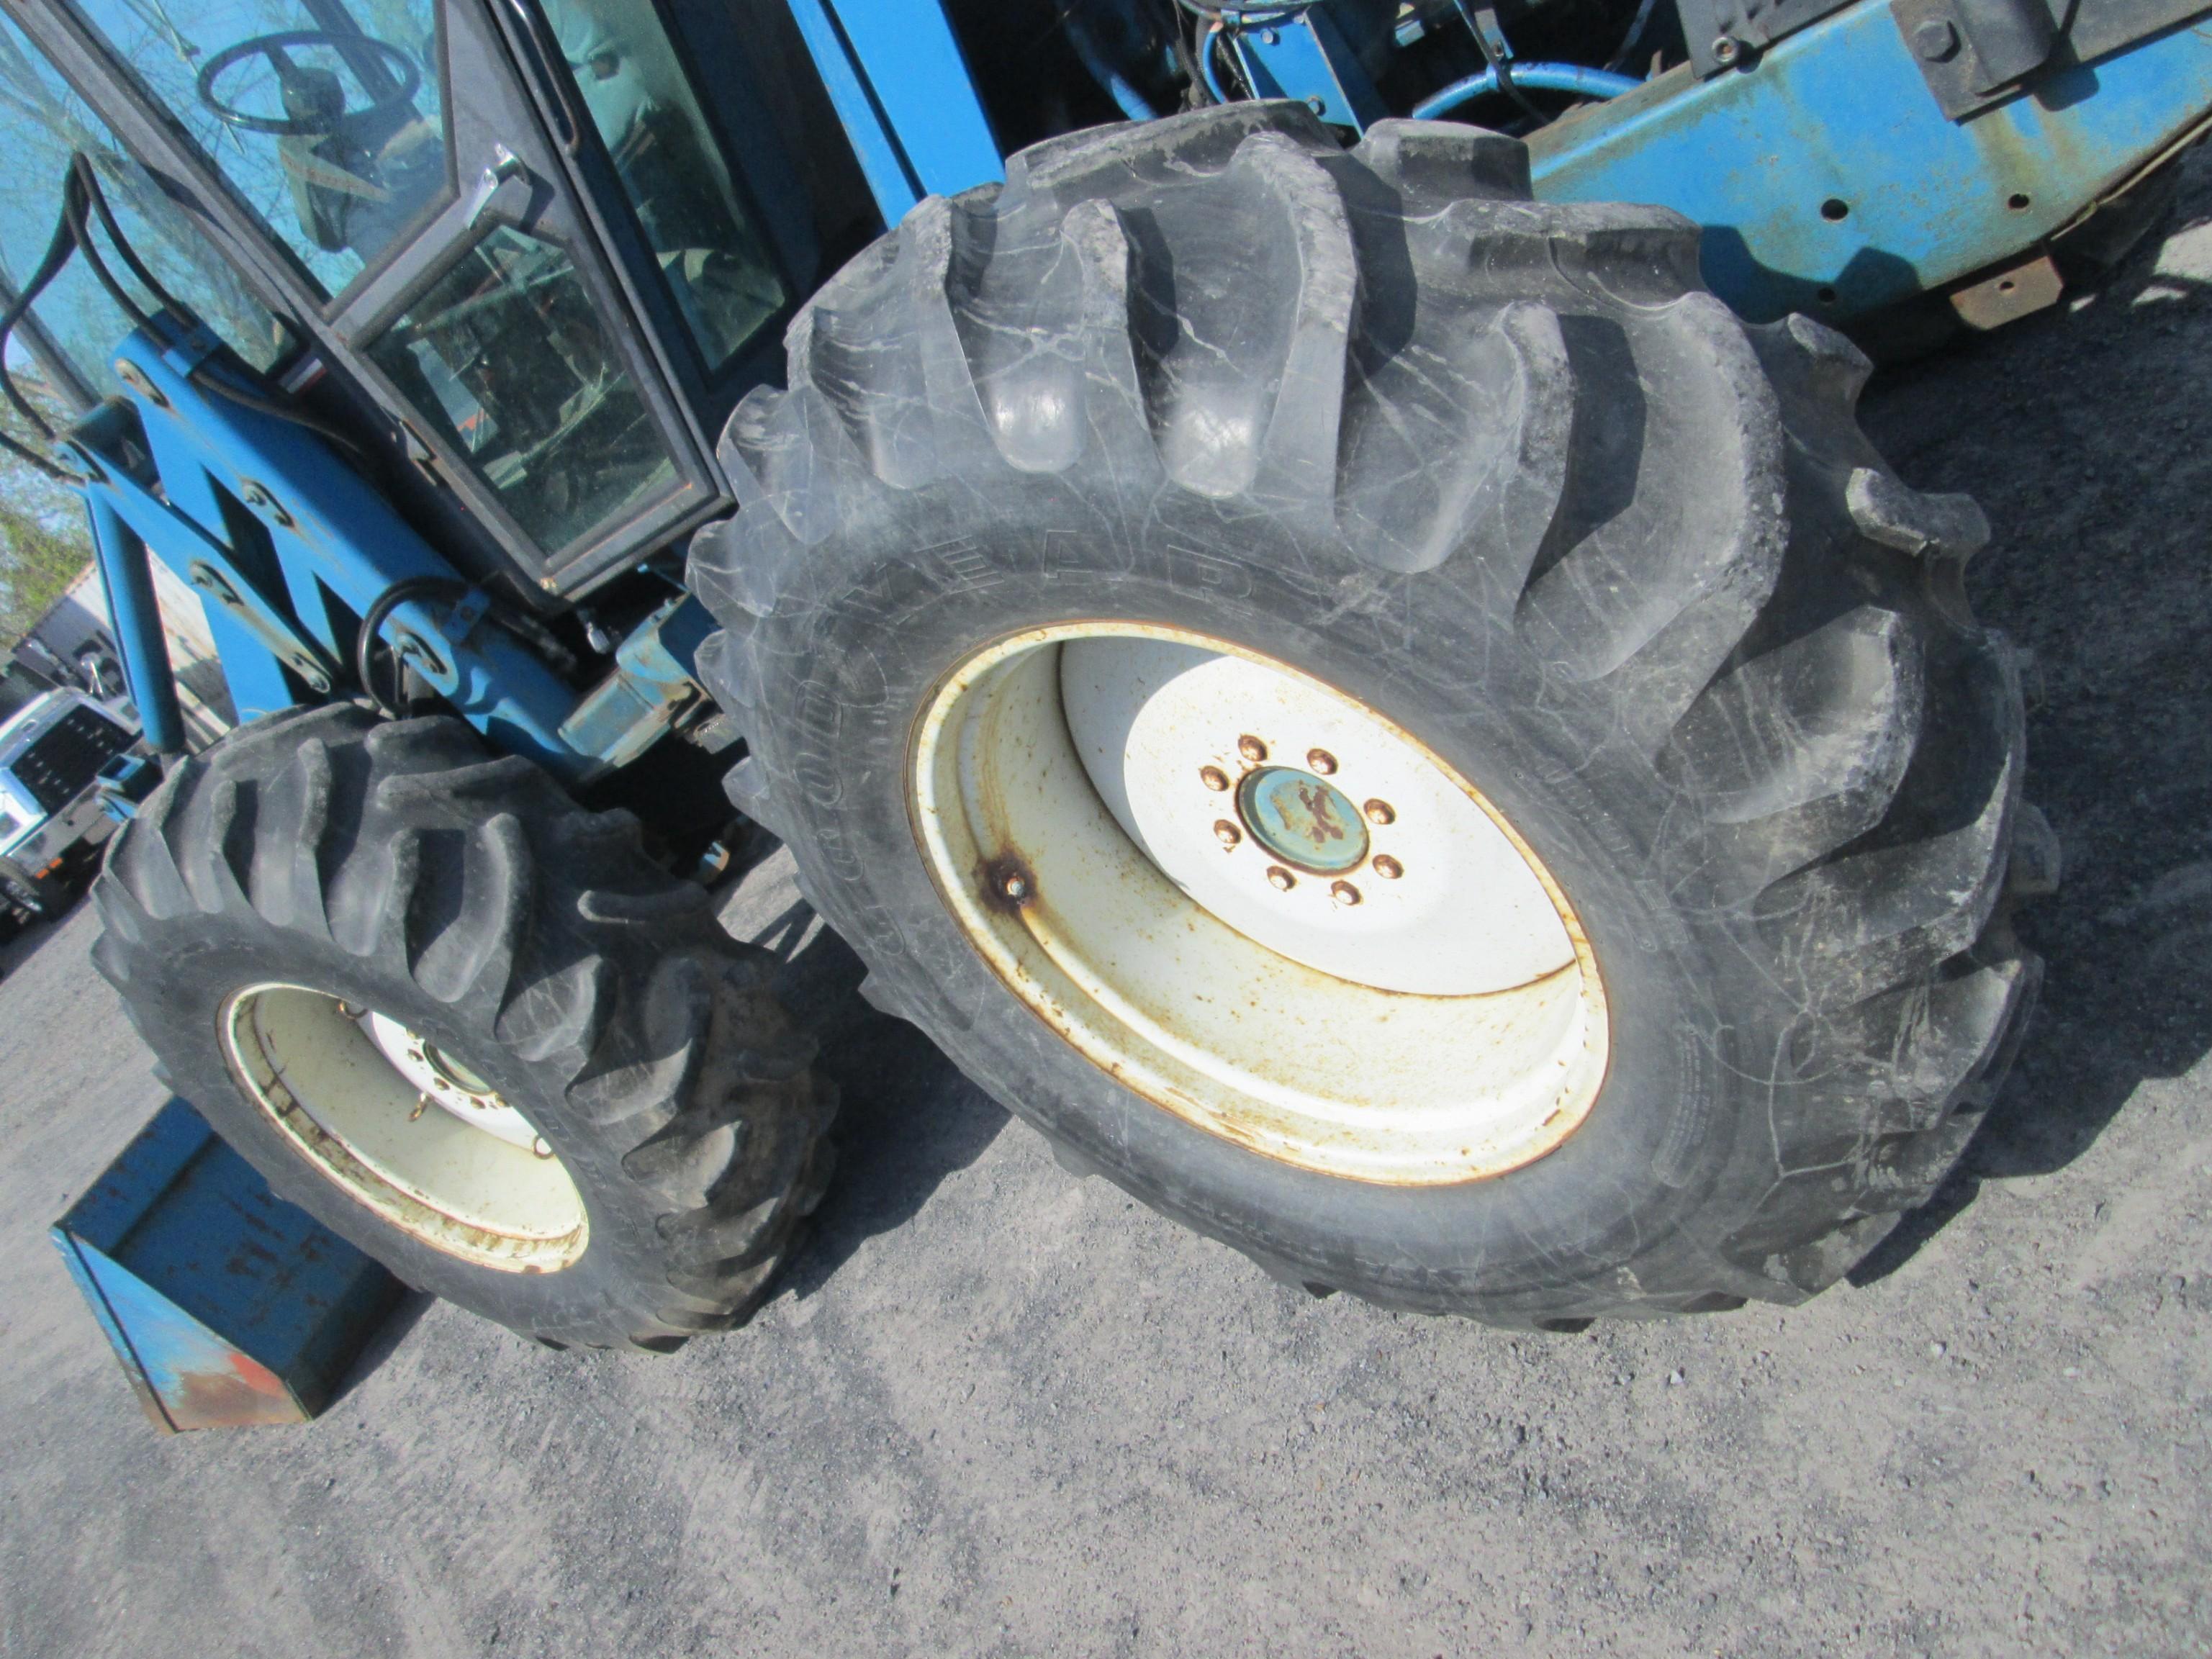 RUBBER TIRED LOADER FORD VERSATILE 9030 4x4 TRACTOR SN 25684205578, POWERED BY FORD DIESEL ENGINE,